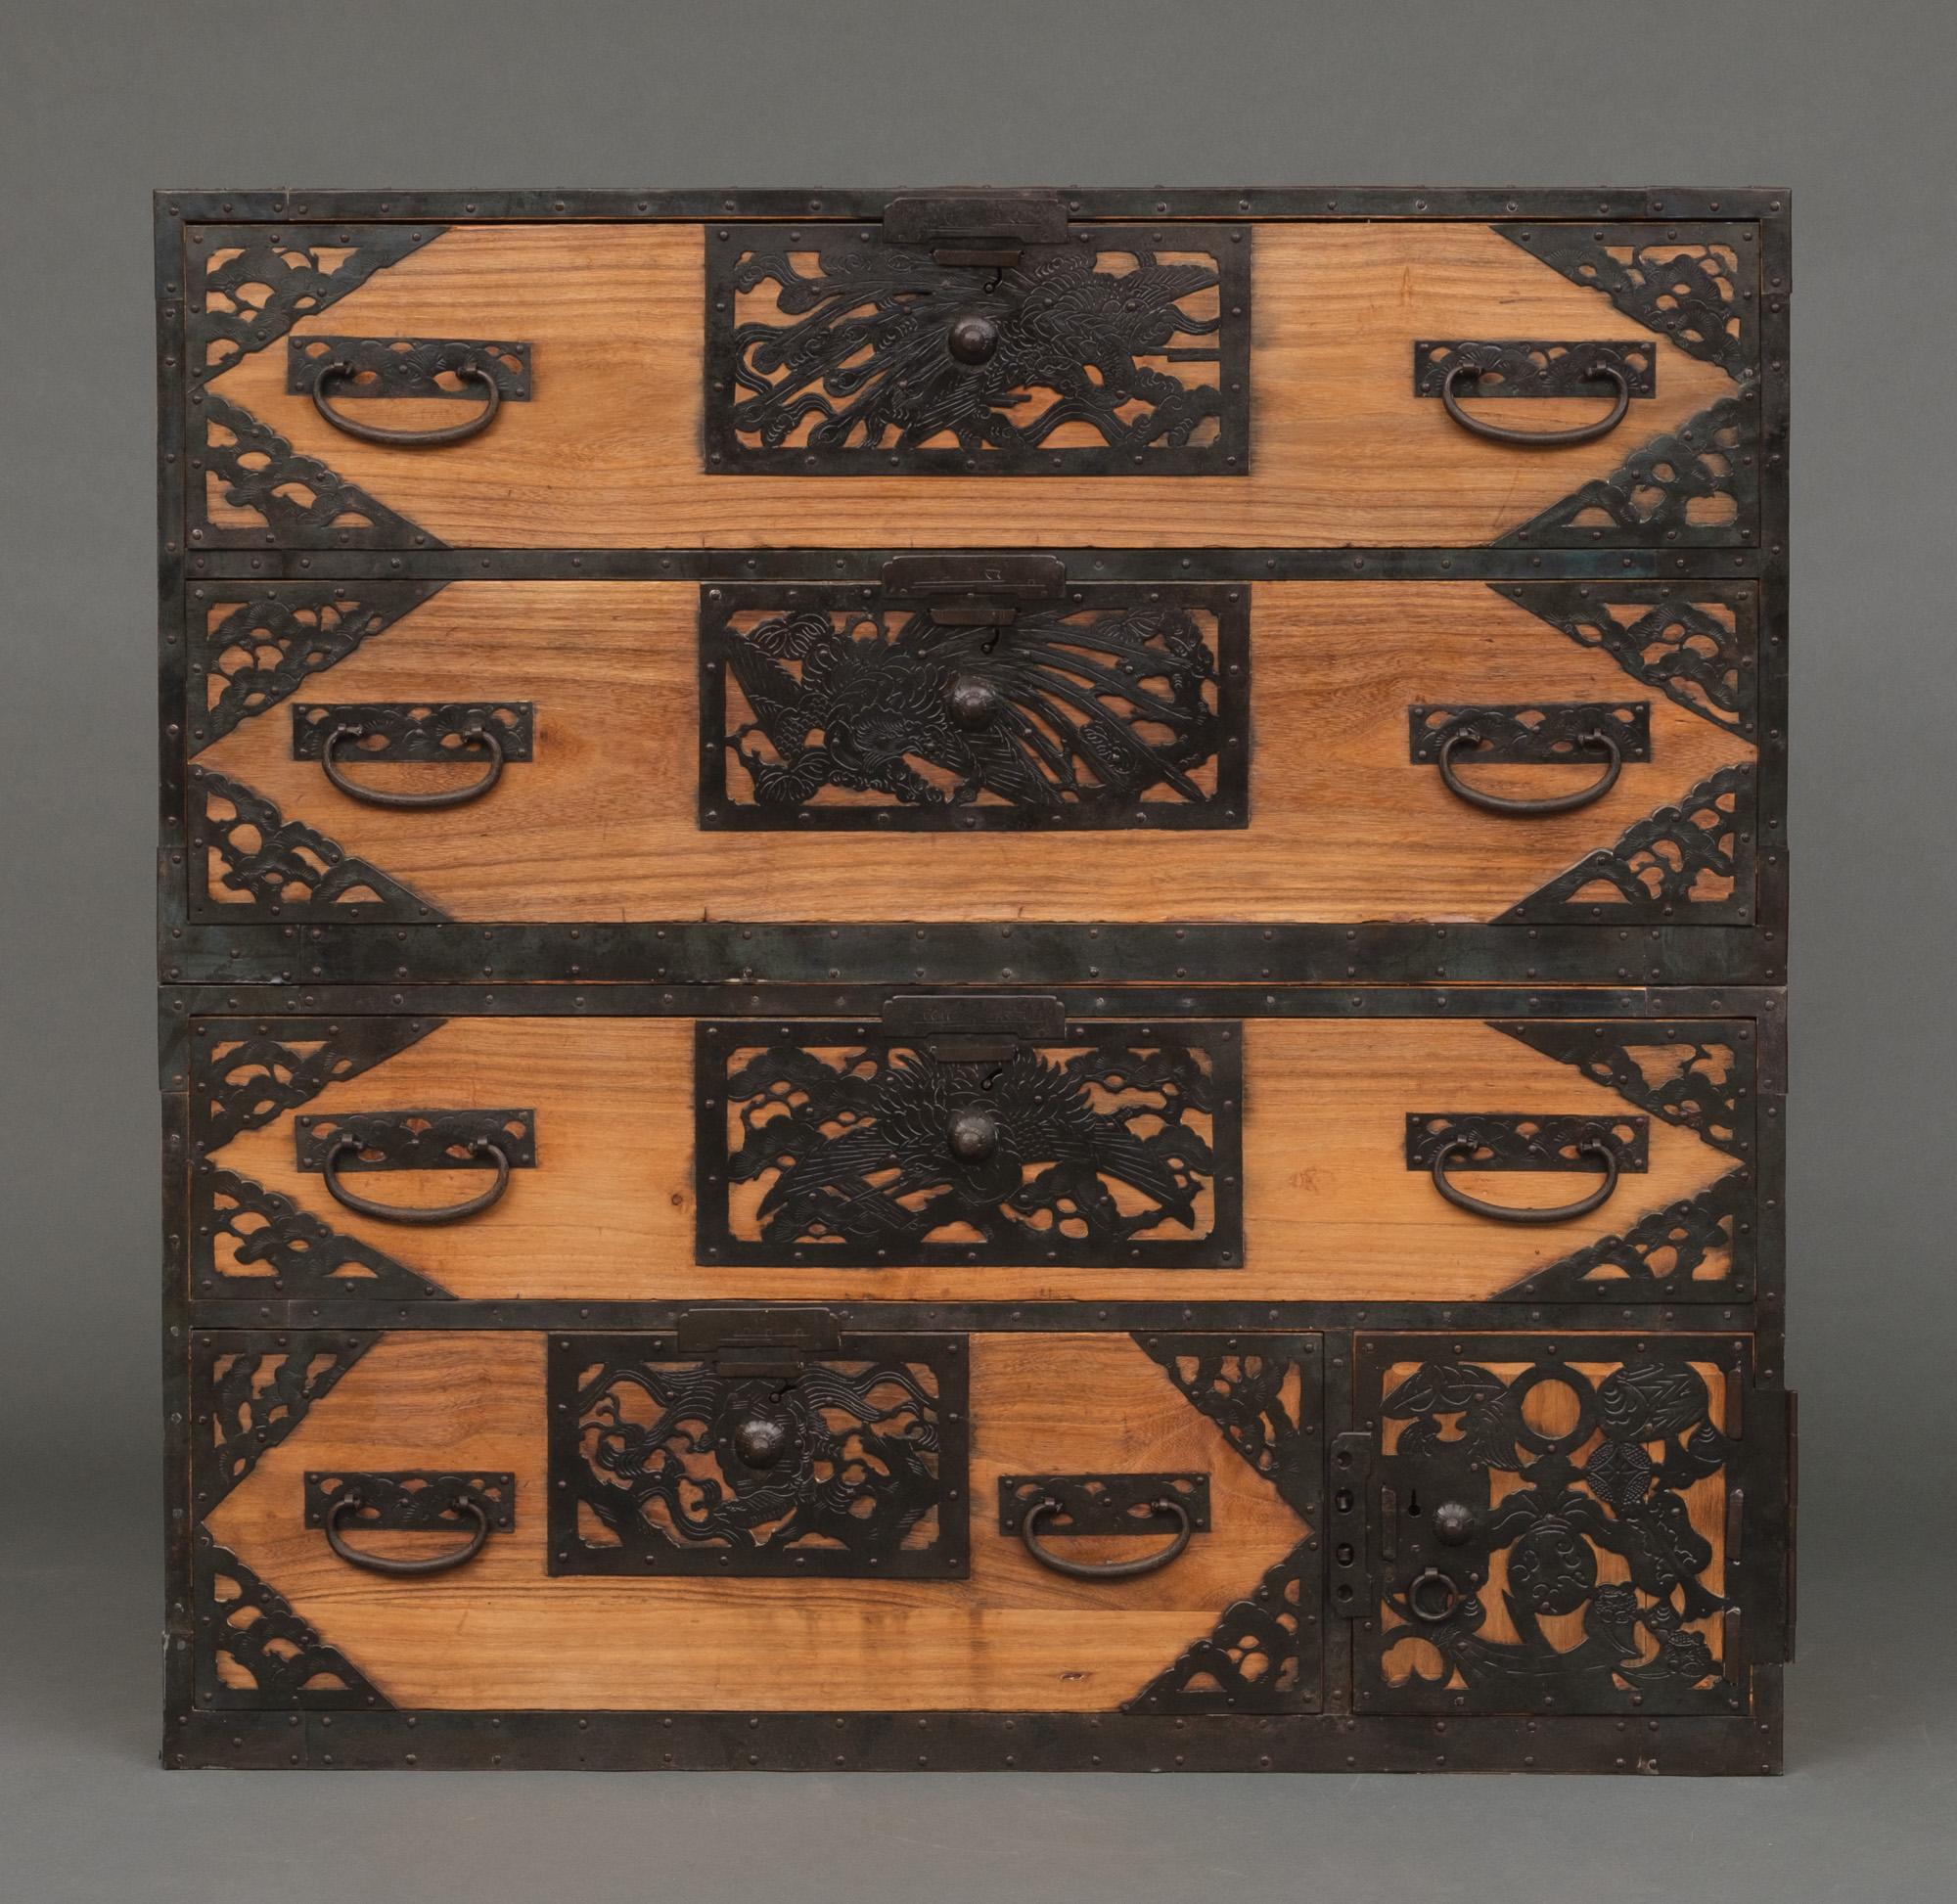 Exceptional, rare and completely restored wooden Sado ishô dansu (cabinet of drawers) with elaborately decorated open work iron hardware, in two sections. Fully restored, cleaned and waxed.

The exterior is made of hinoki cypress wood. Only slightly